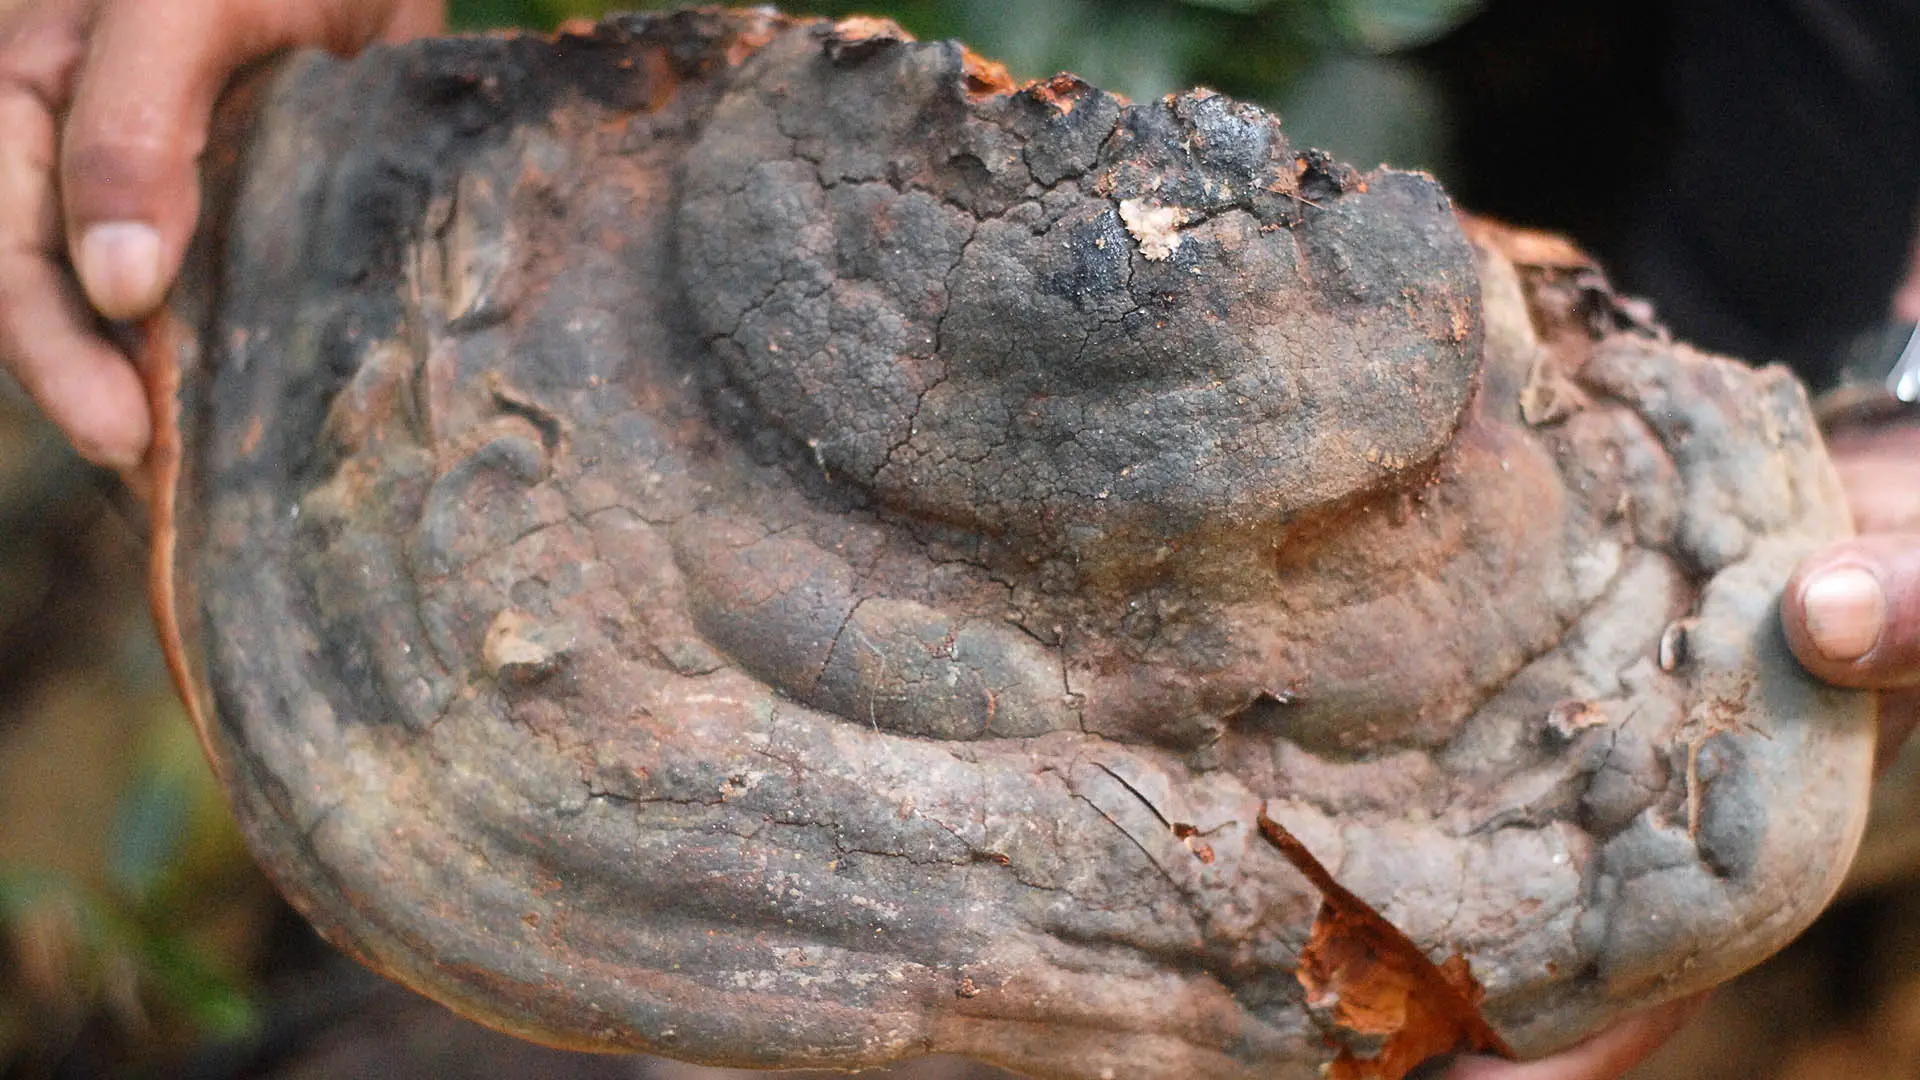 Close up of a fungus as wide as two adult hands with brown and black exterior and orange inner flesh. 